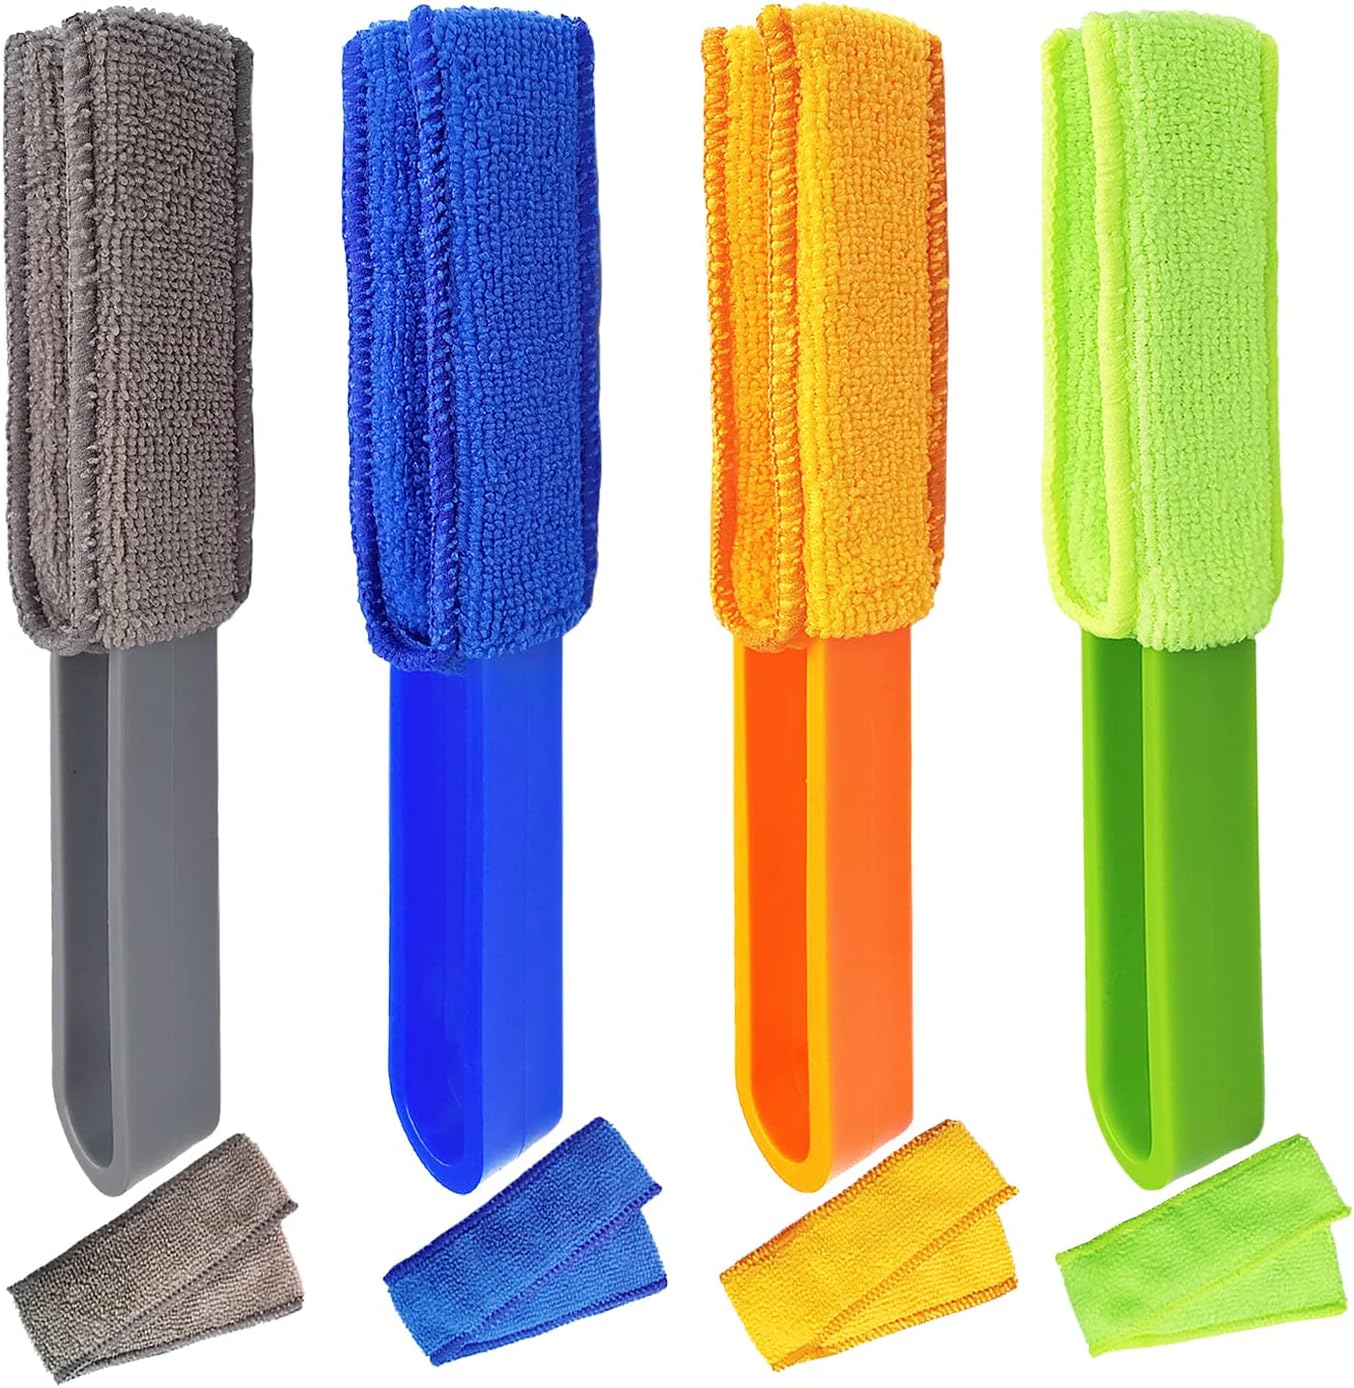 4 Pack Blinds Duster, Window Blinds Cleaner Duster [...]